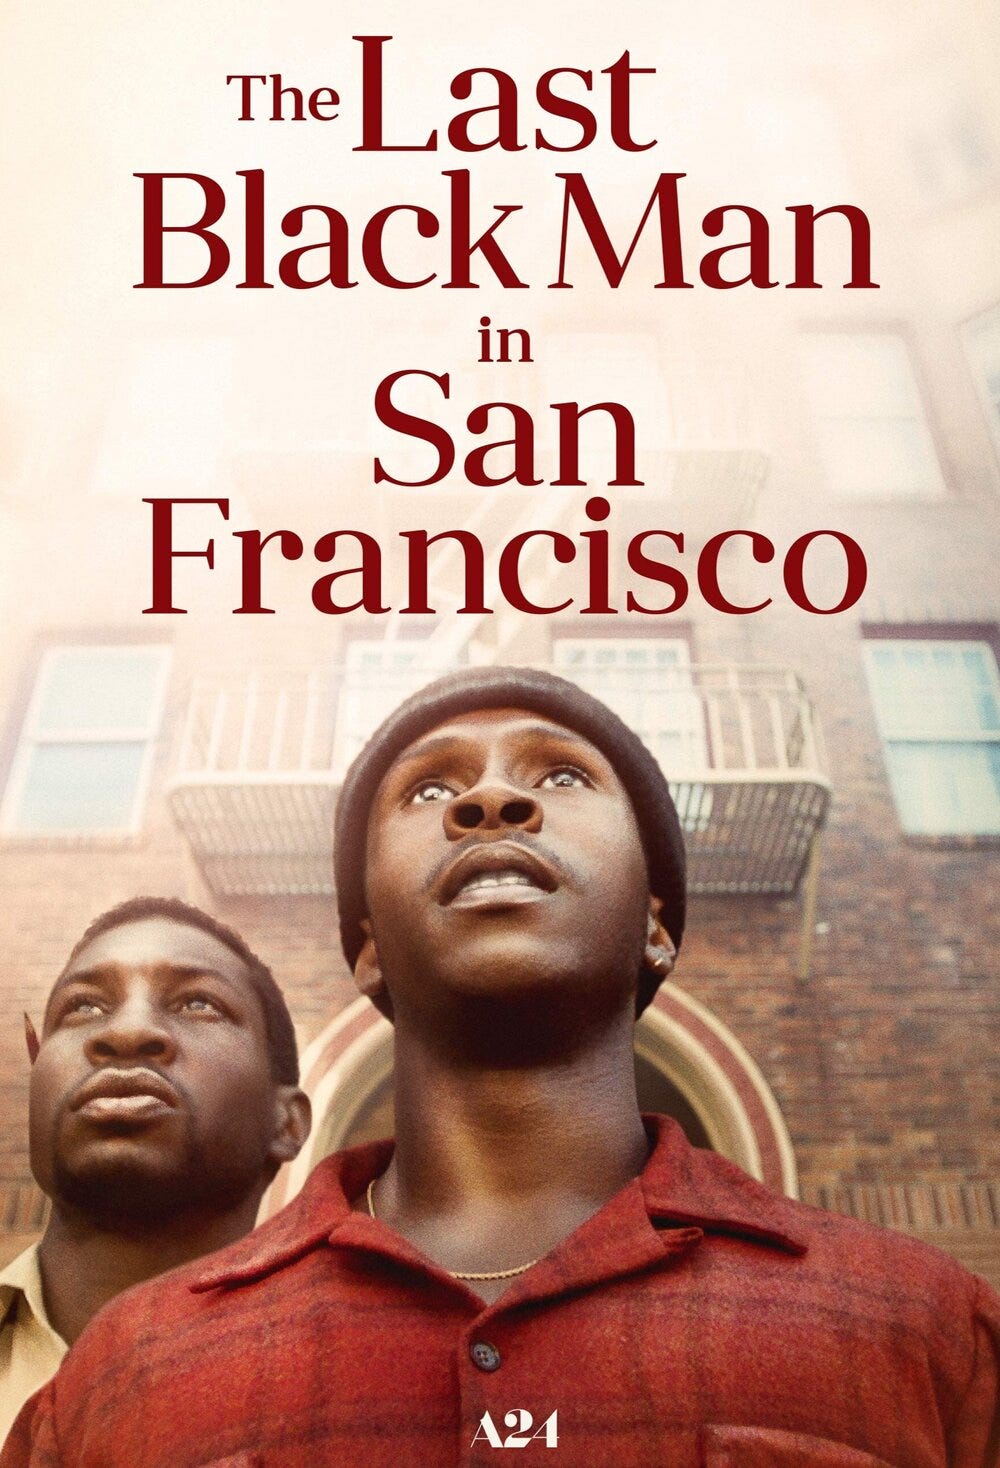 This may have been the most underrated film of 2019. It is a tragic story of a black man living in the increasingly gentrified San Francisco. The soundtrack and cinematography alone will leave you breathless and in tears.  Available now on Amazon Prime. (6/30/20)